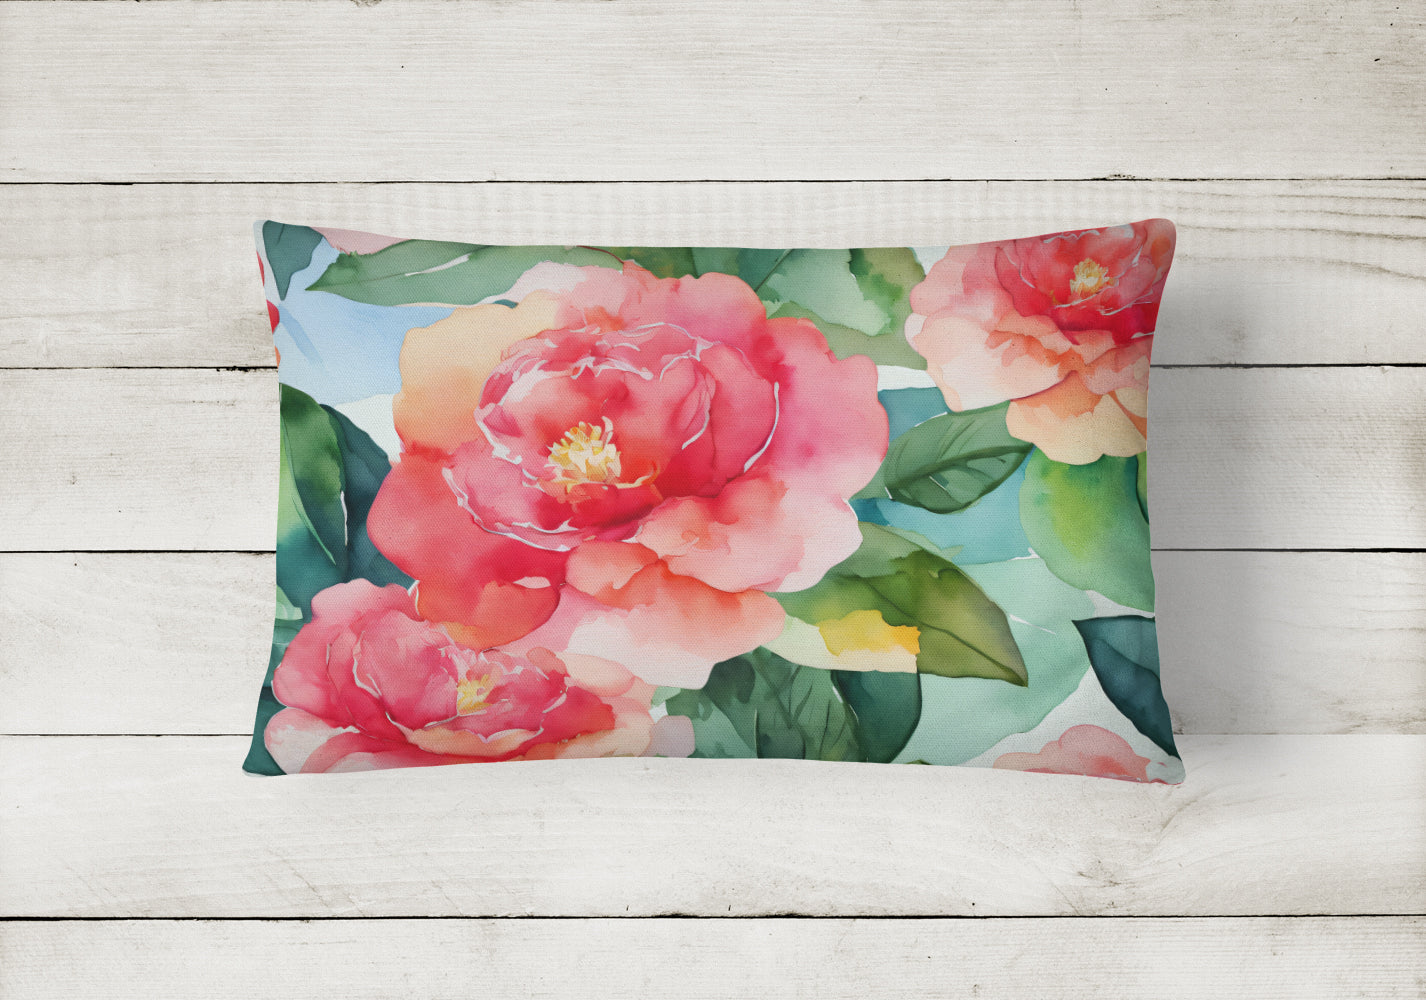 Buy this Alabama Camellia in Watercolor Fabric Decorative Pillow